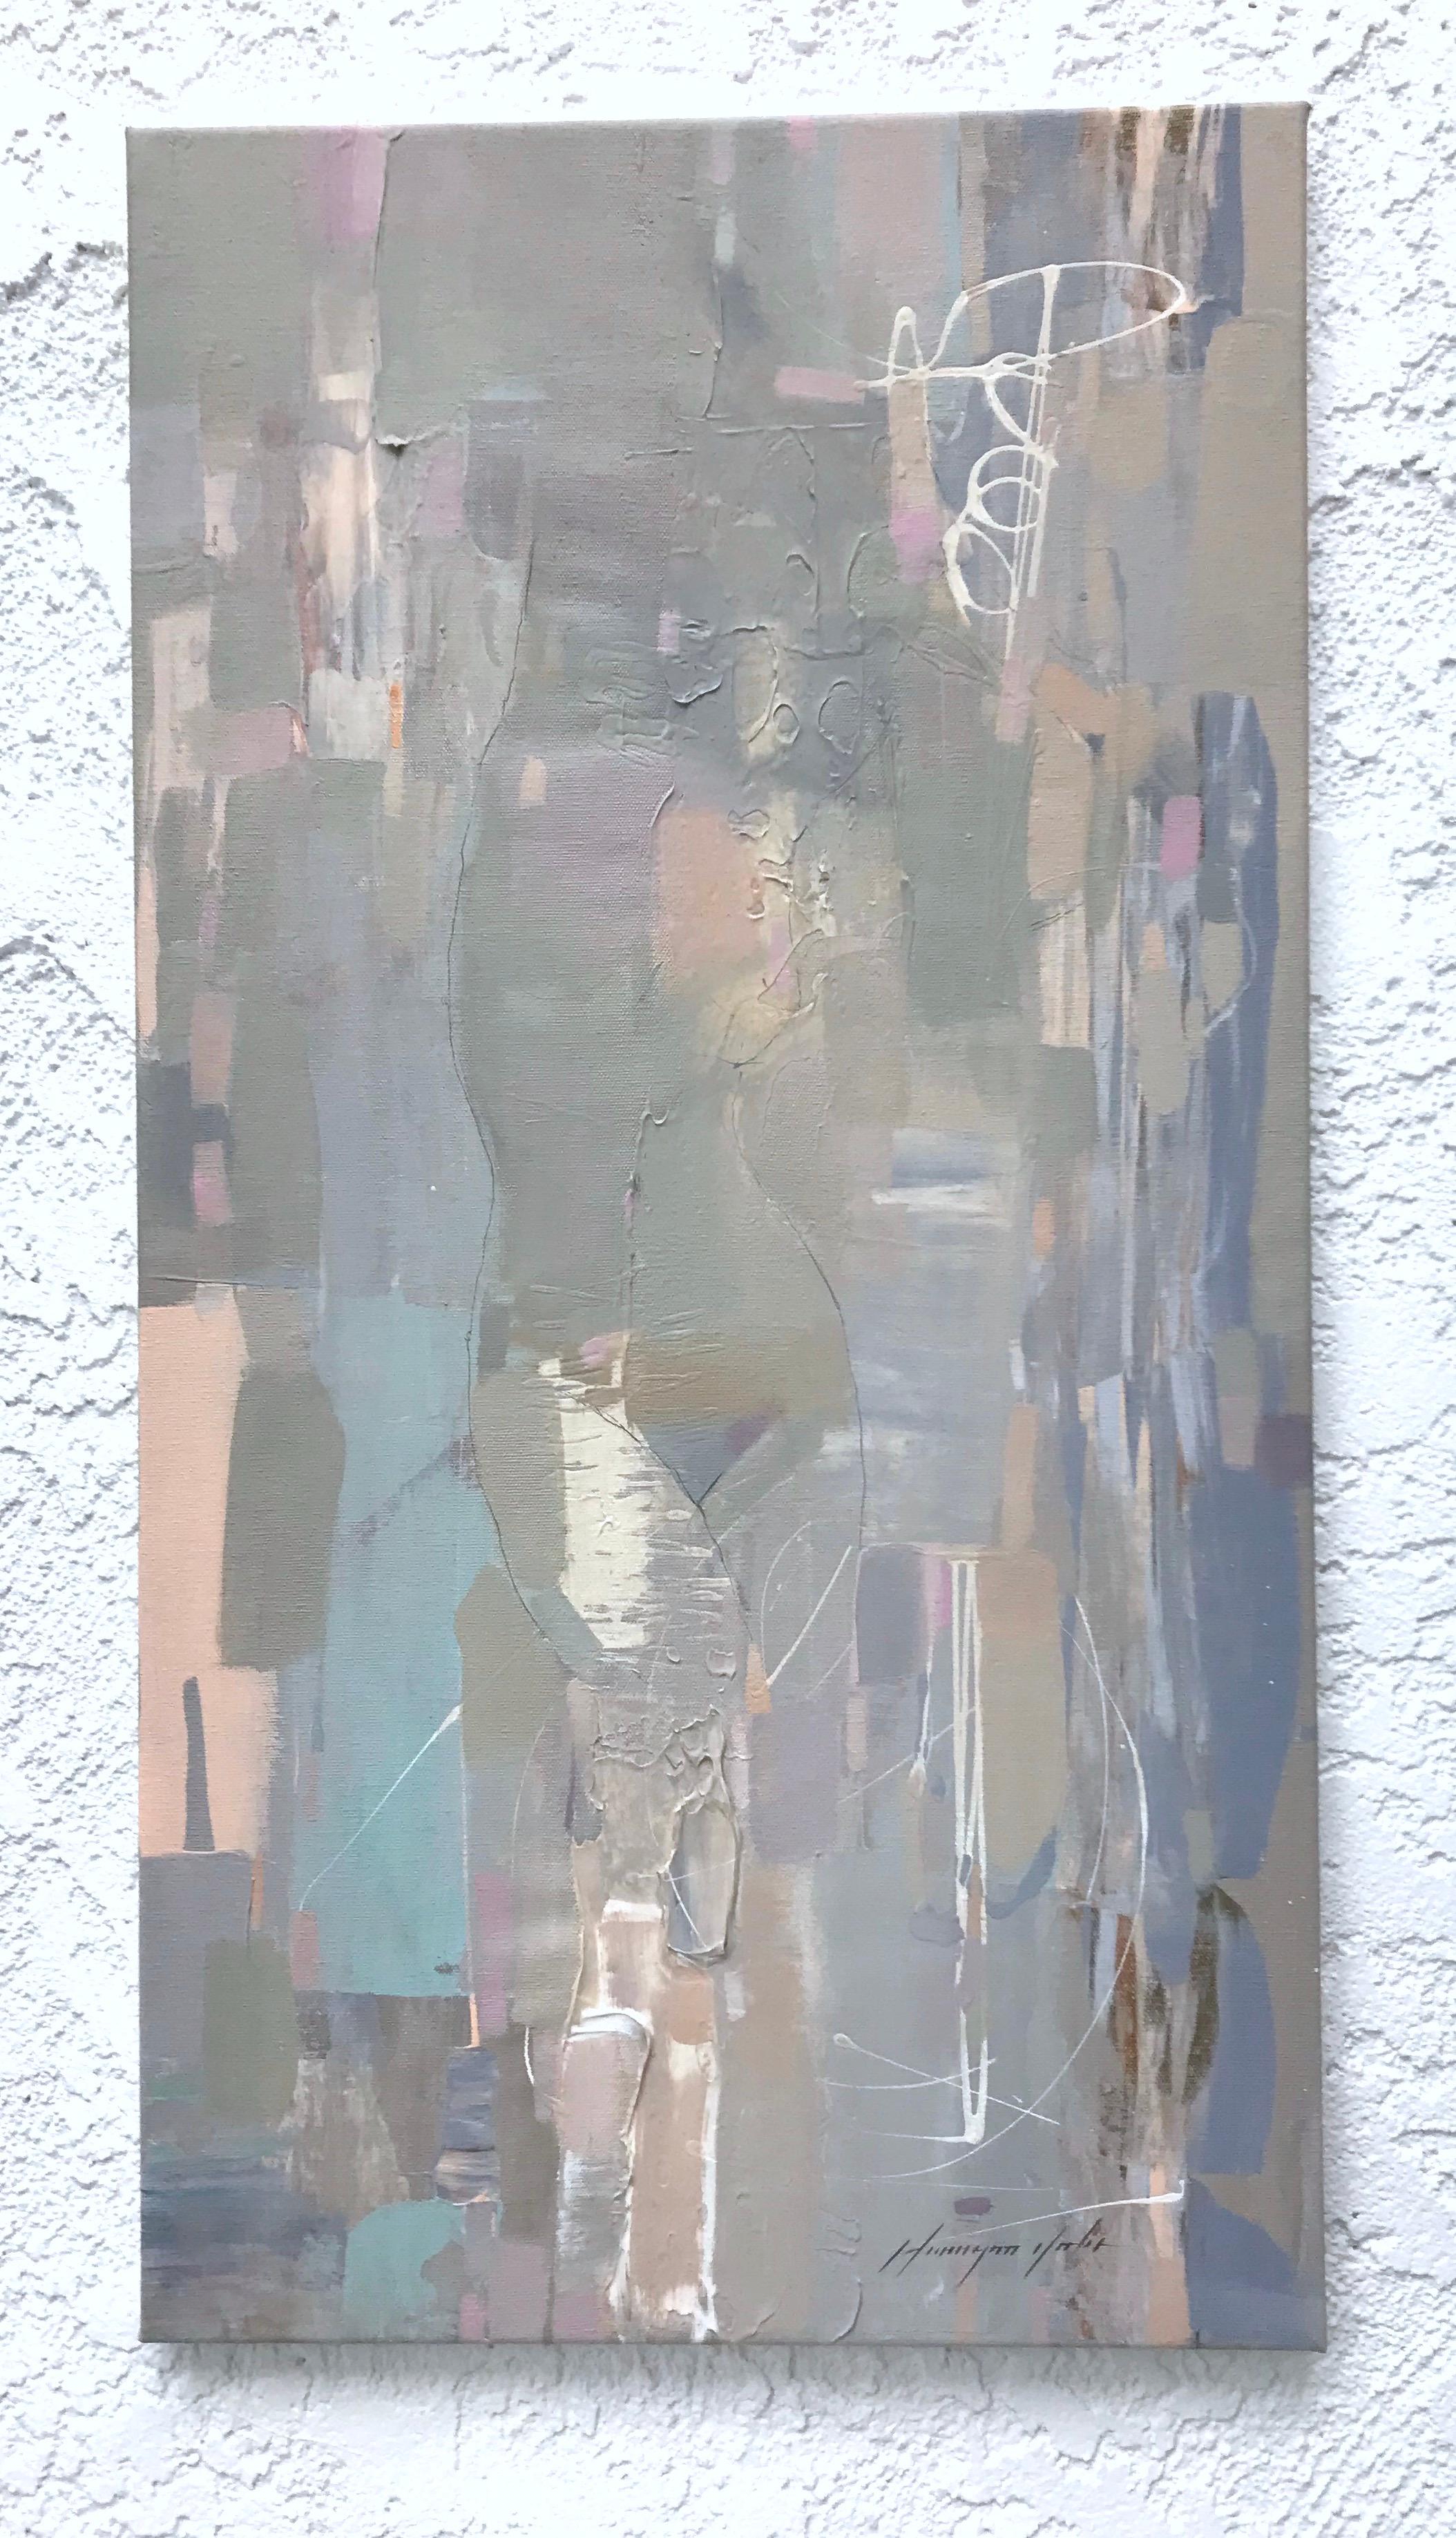 Artist: Vahe Yeremyan 
Work: Original Oil Painting, Handmade Artwork, One of a Kind 
Medium: Oil on Canvas 
Year: 2020
Style: Abstract Art, 
Subject: Figure in Gray,
Size: 30